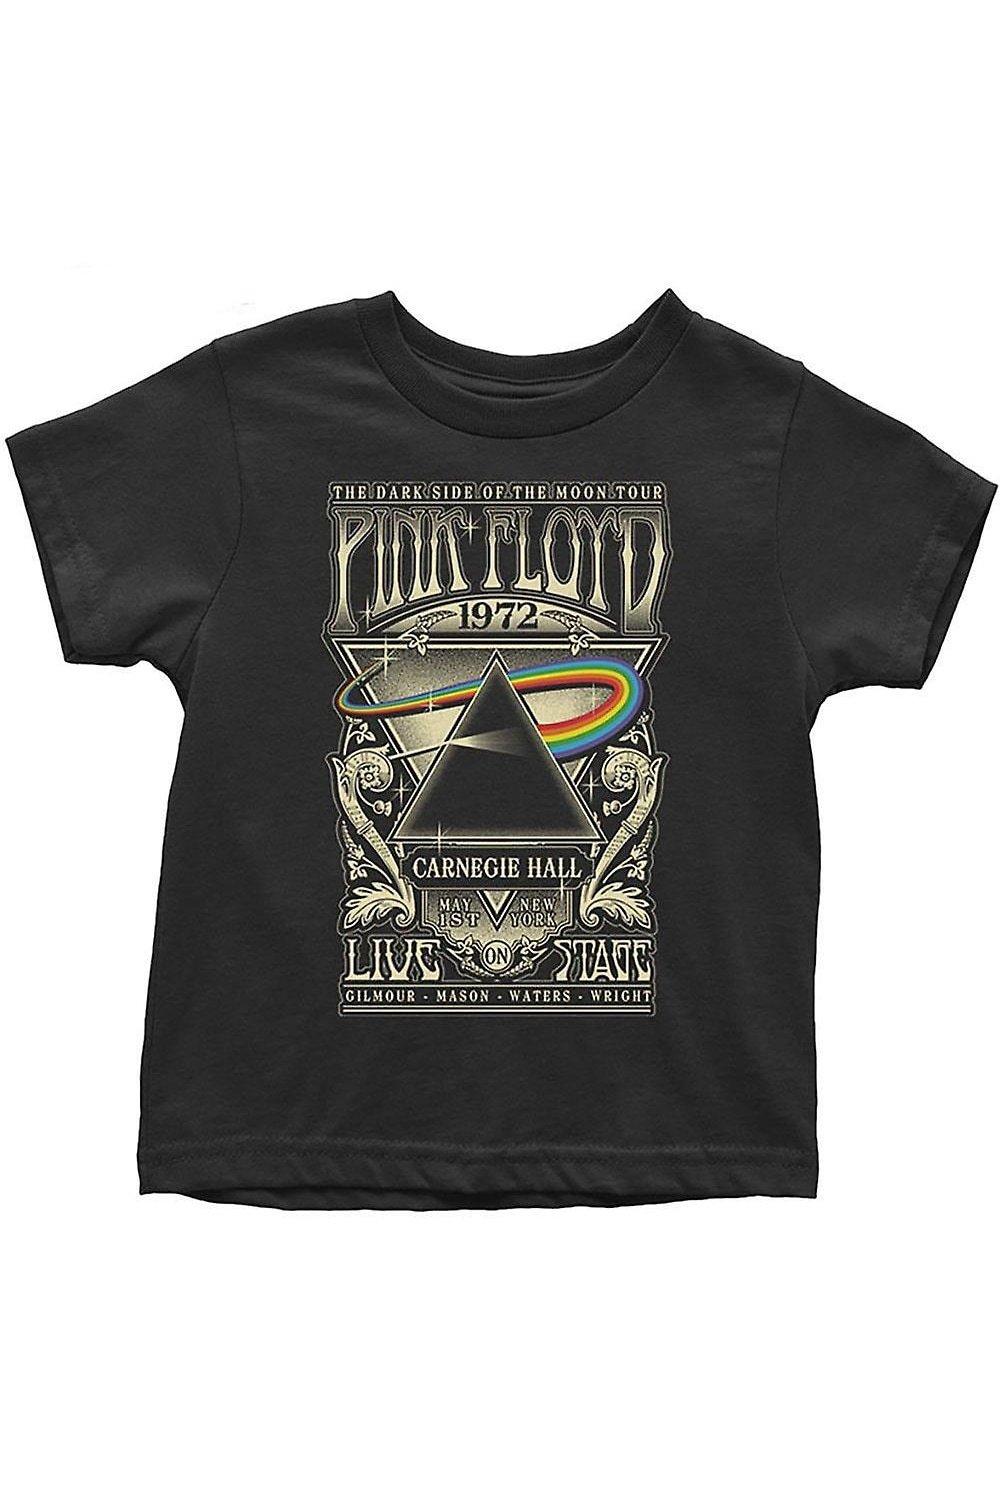 Carnegie Hall Poster T-Shirt